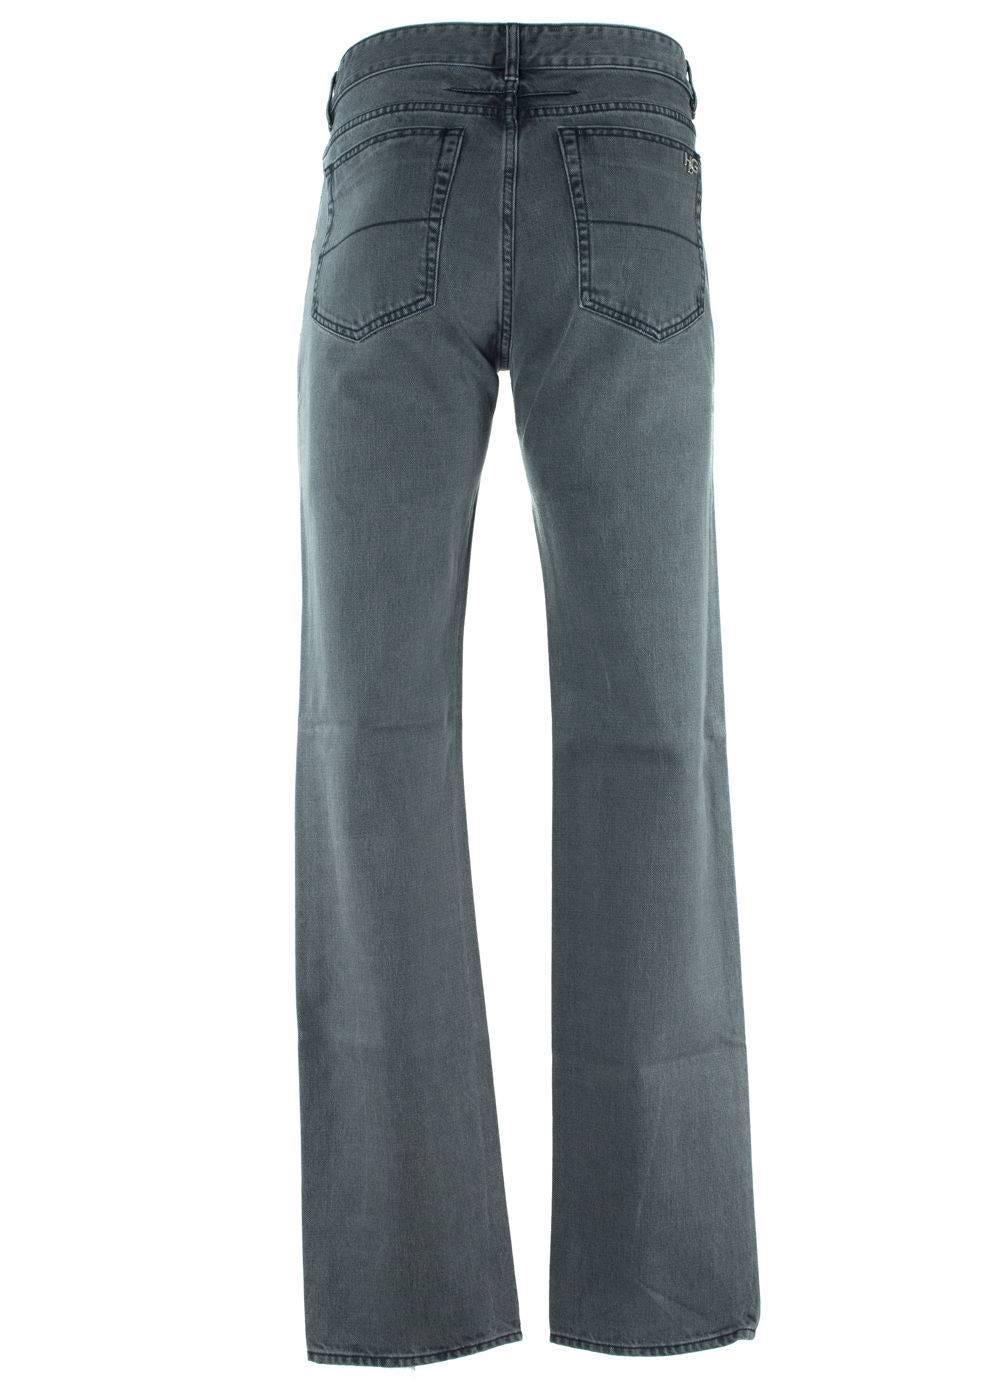 Brand New Givenchy Men's Jeans
Original Tag
Retails in Stores & Online for $580
Men's Size US30 Fits True to Size

Givenchy's classic gray simplistic cotton jeans. Suitable for all seasons, weather and occasions with its classic silhouette. Made